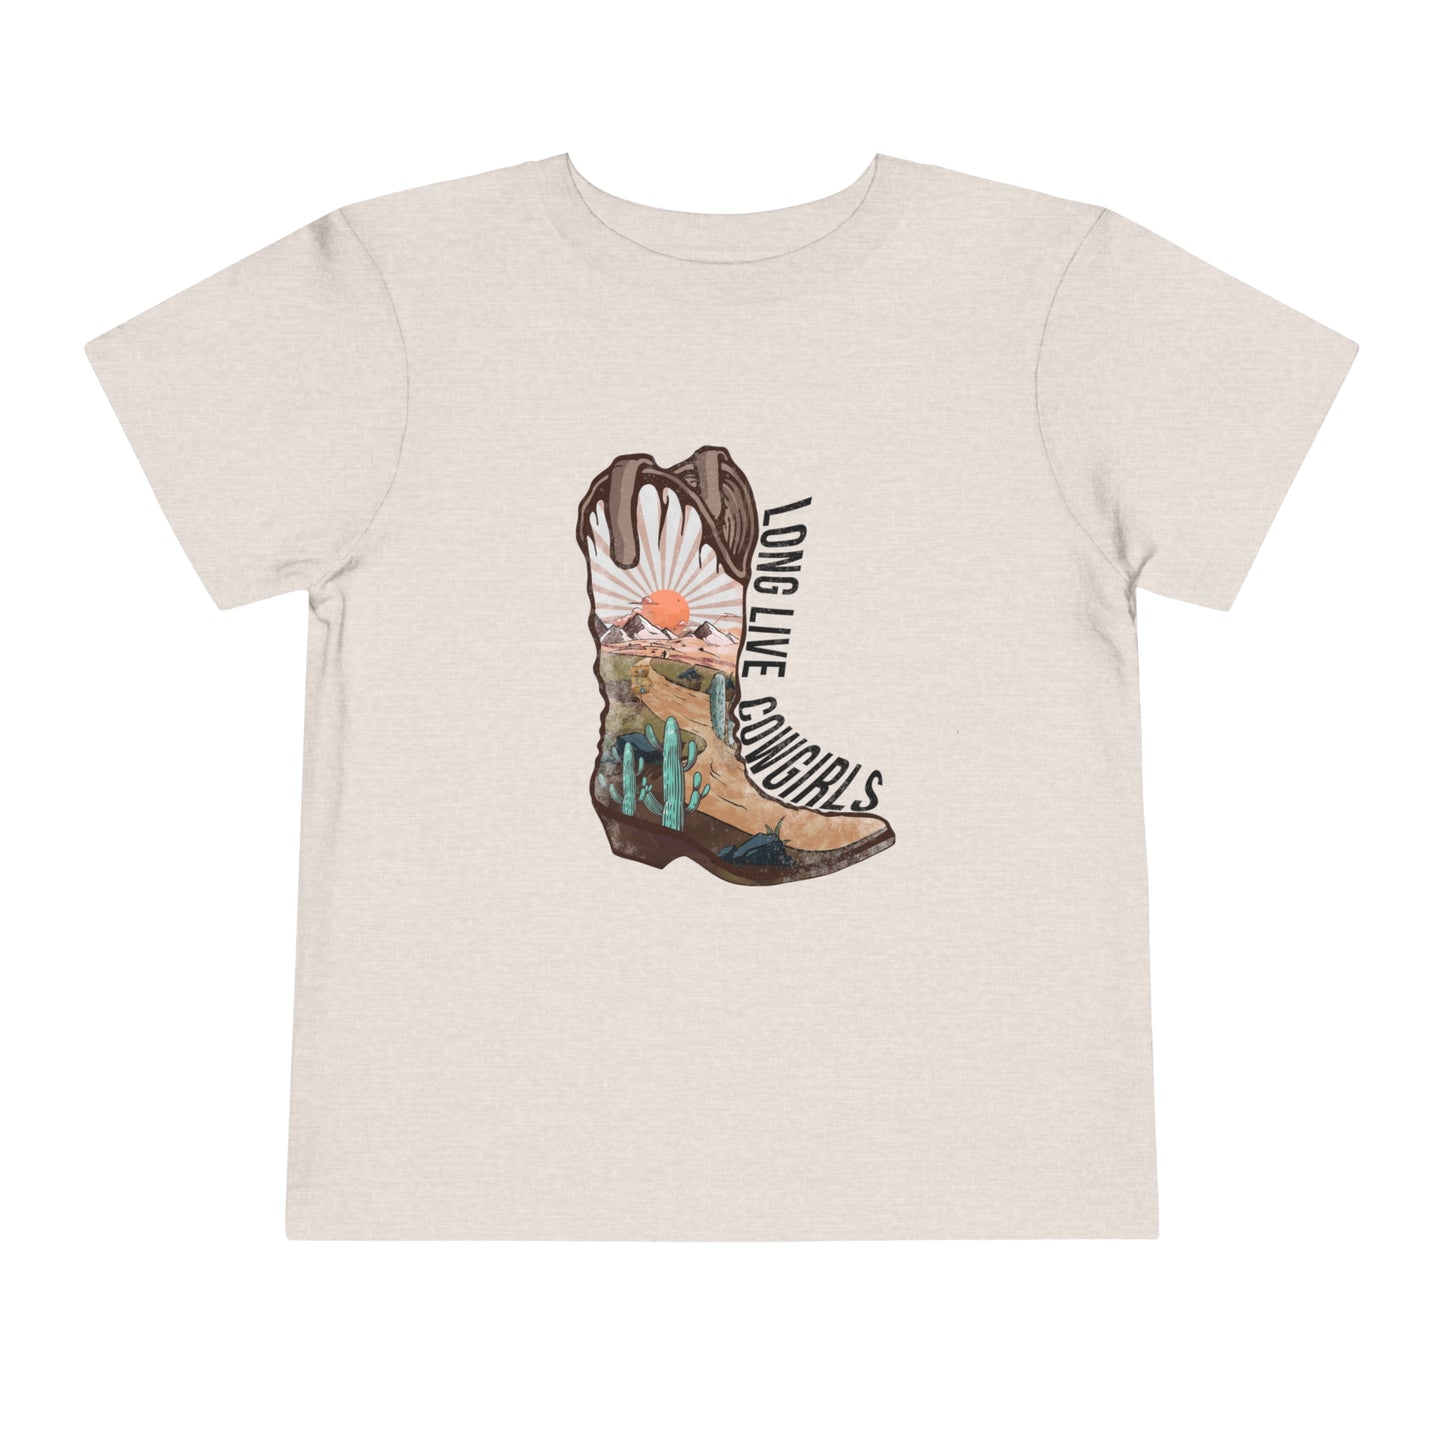 Long Live Cowgirls | Toddler T-shirt | Retro Western Toddler Tee